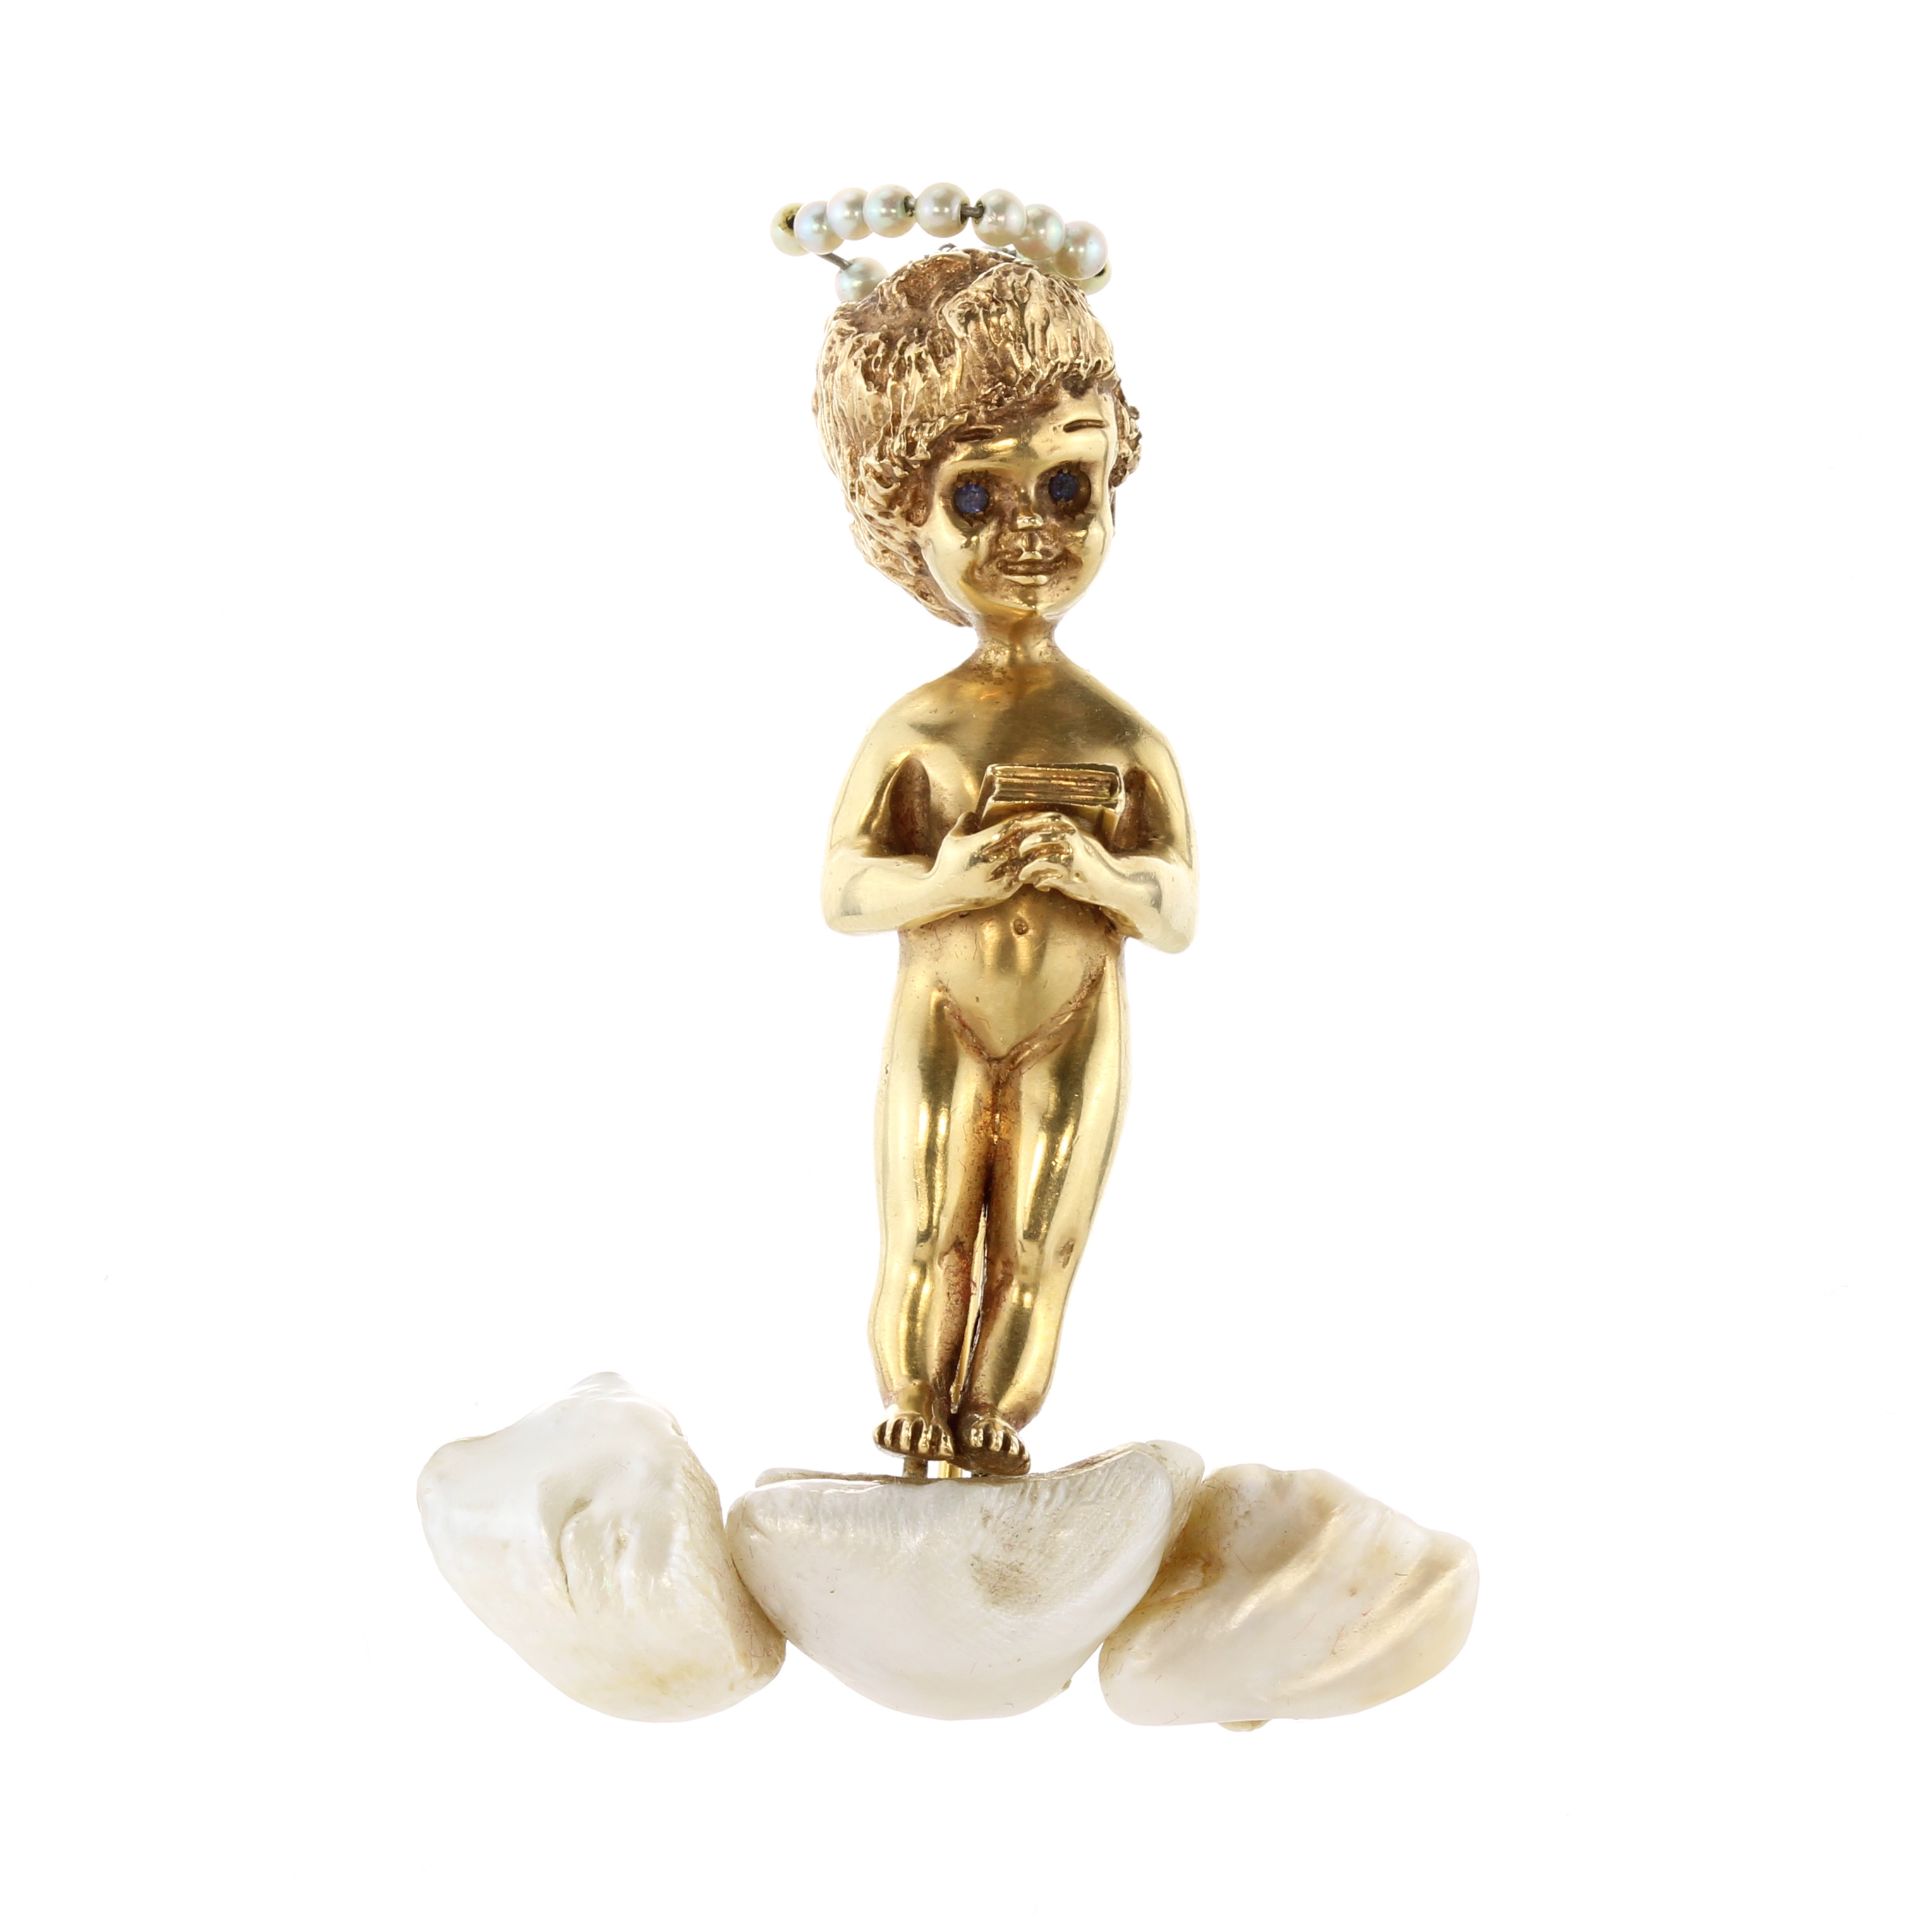 RUSER A vintage jewelled pearl Sunday's Child brooch by William Ruser, Beverley Hills circa 1960